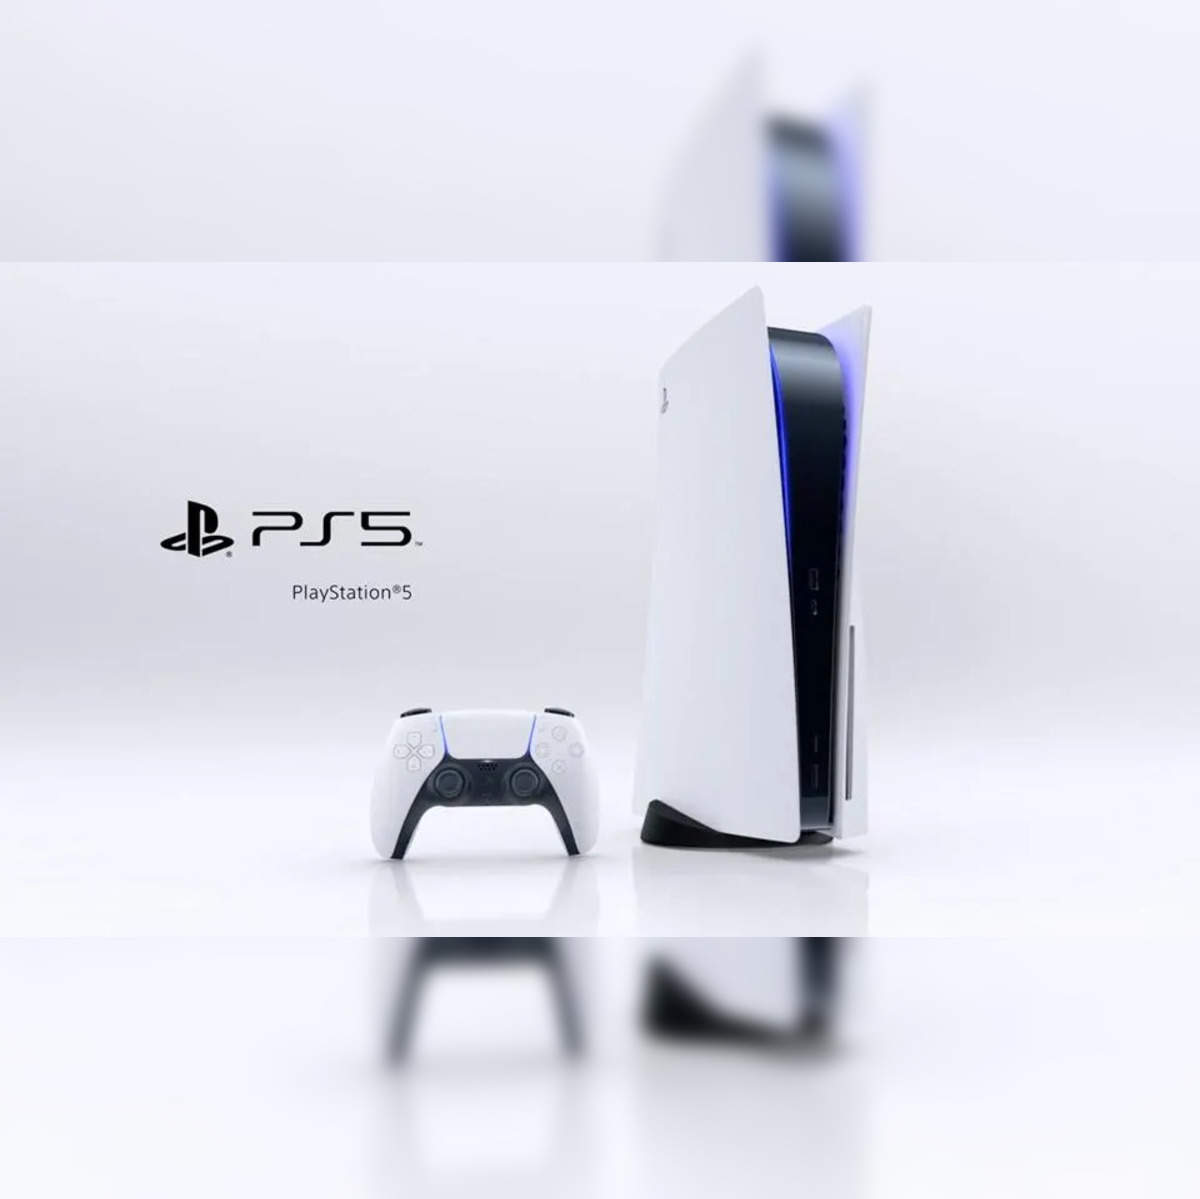 PlayStation 5 Slim: price, release date, new features